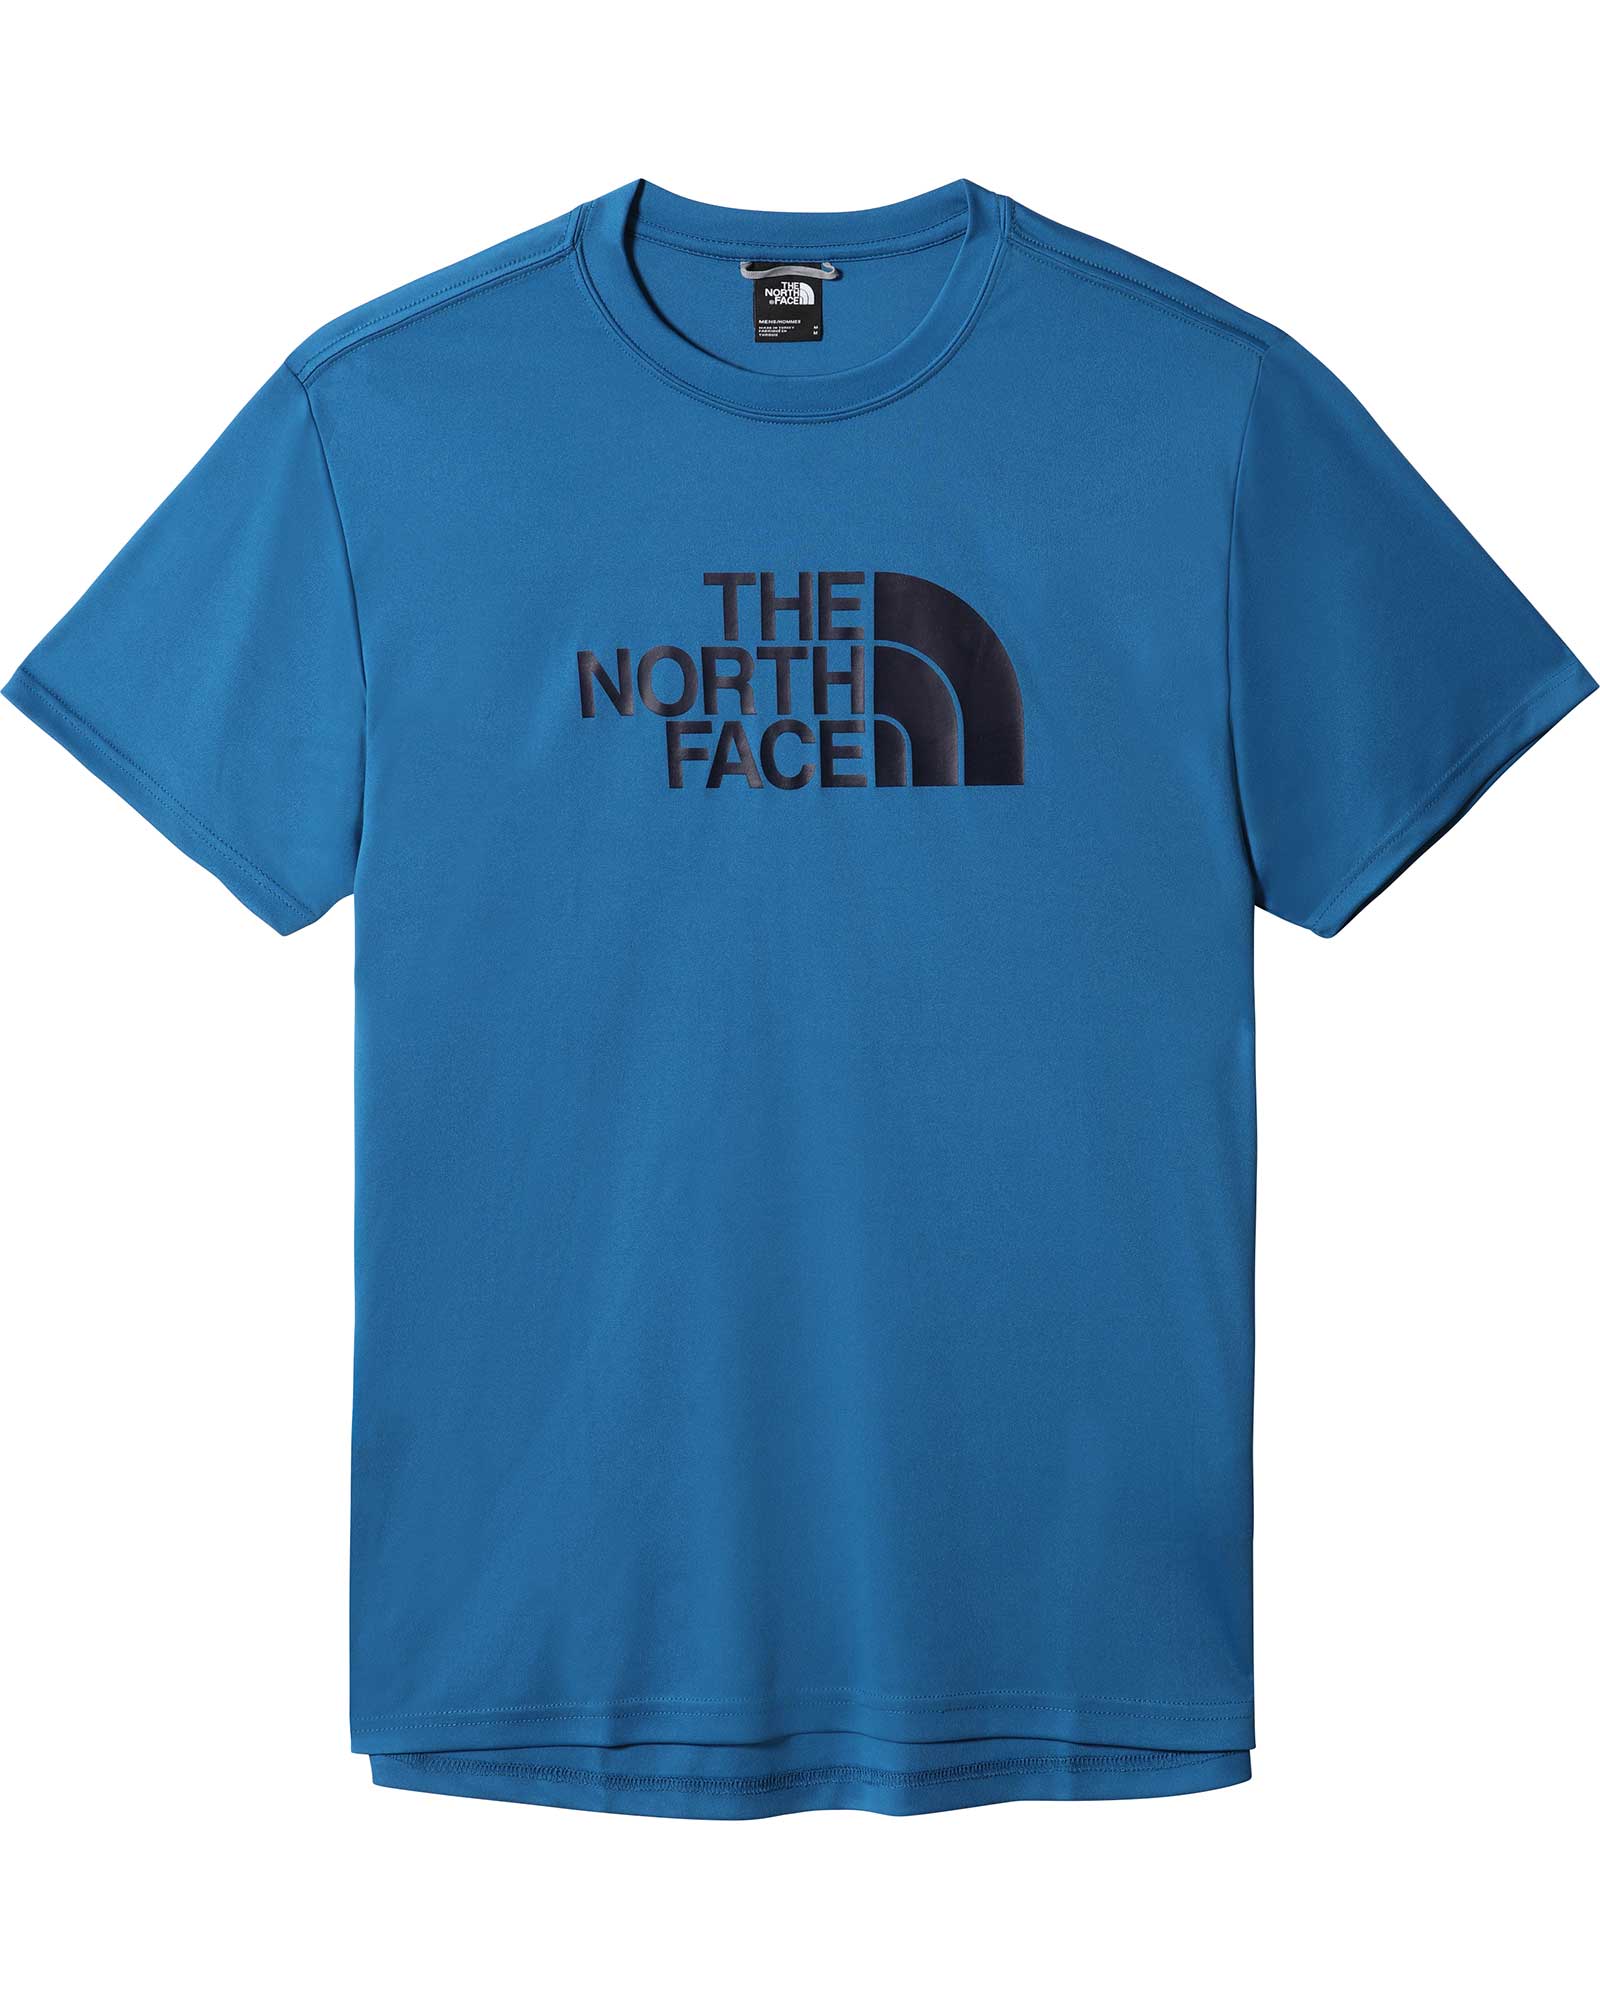 The North Face Reaxion Easy Men’s T Shirt - Banff Blue S